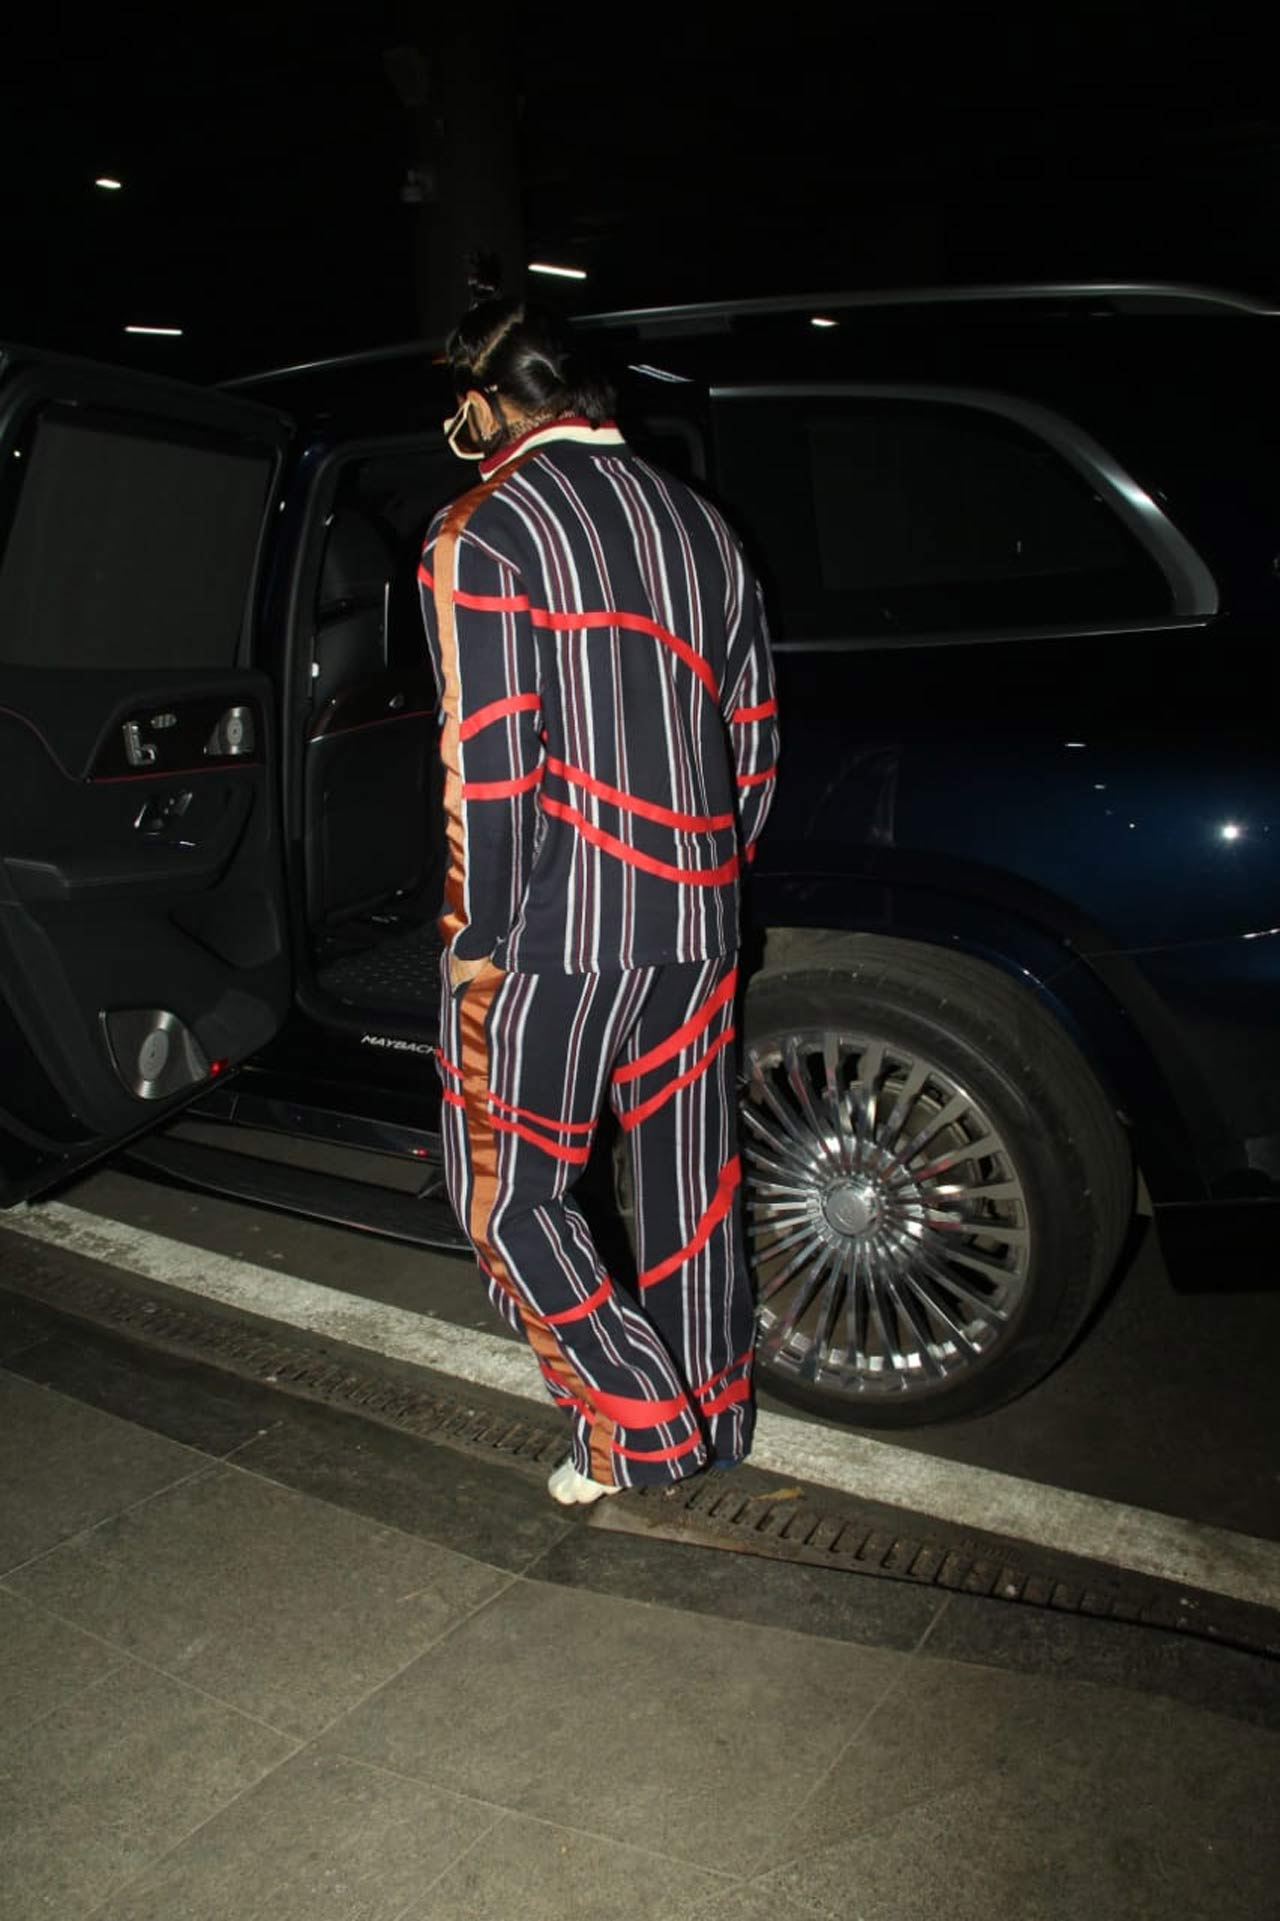 It is also said that Deepika Padukone and Ranveer Singh are all set to join the bidding war for one of the two new IPL teams along with other big players.
What do you think about this latest whacky look of Ranveer Singh?